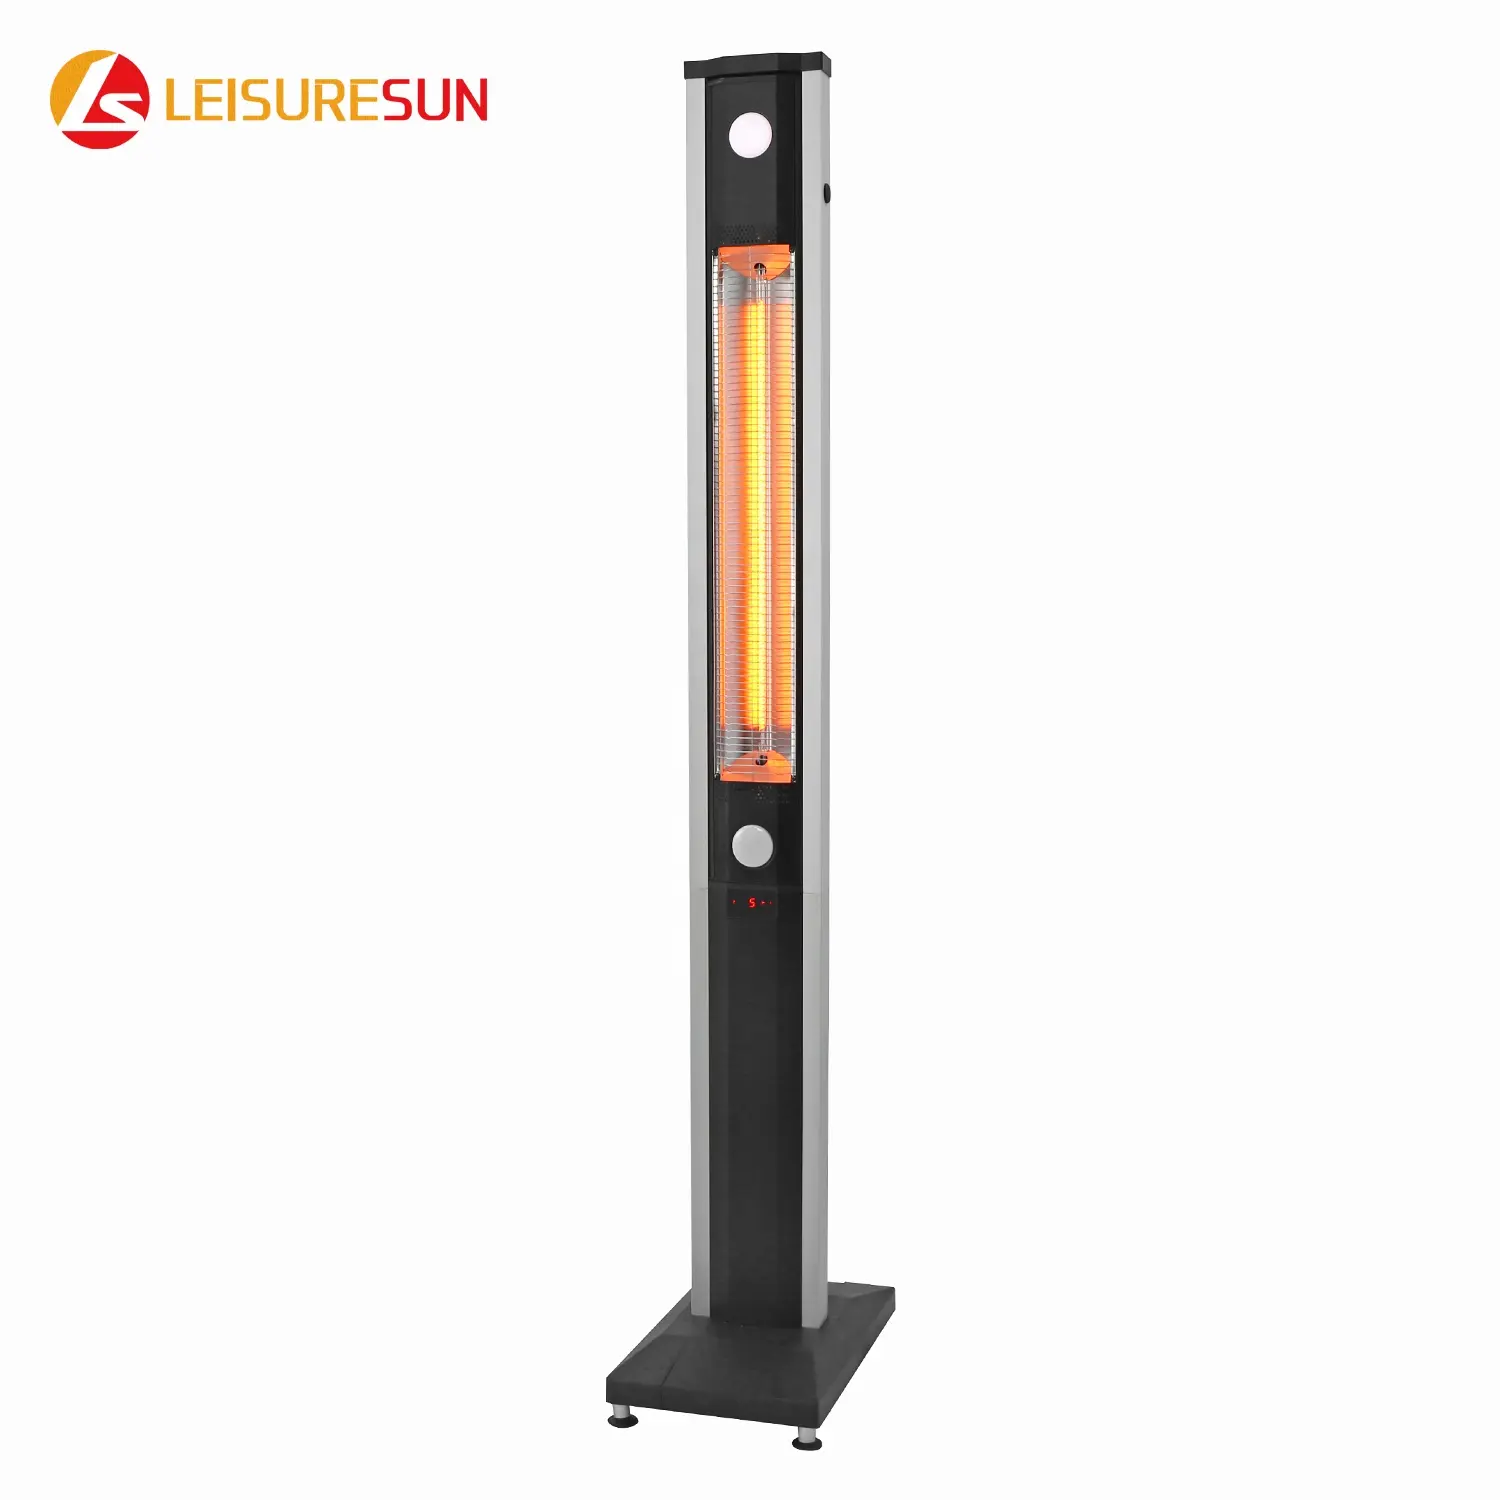 EH920 2200W Two-Way Freestanding Patio Heater With Remote Control & LED Lights CE (EMC, LVD), RoHS, CB Certificate